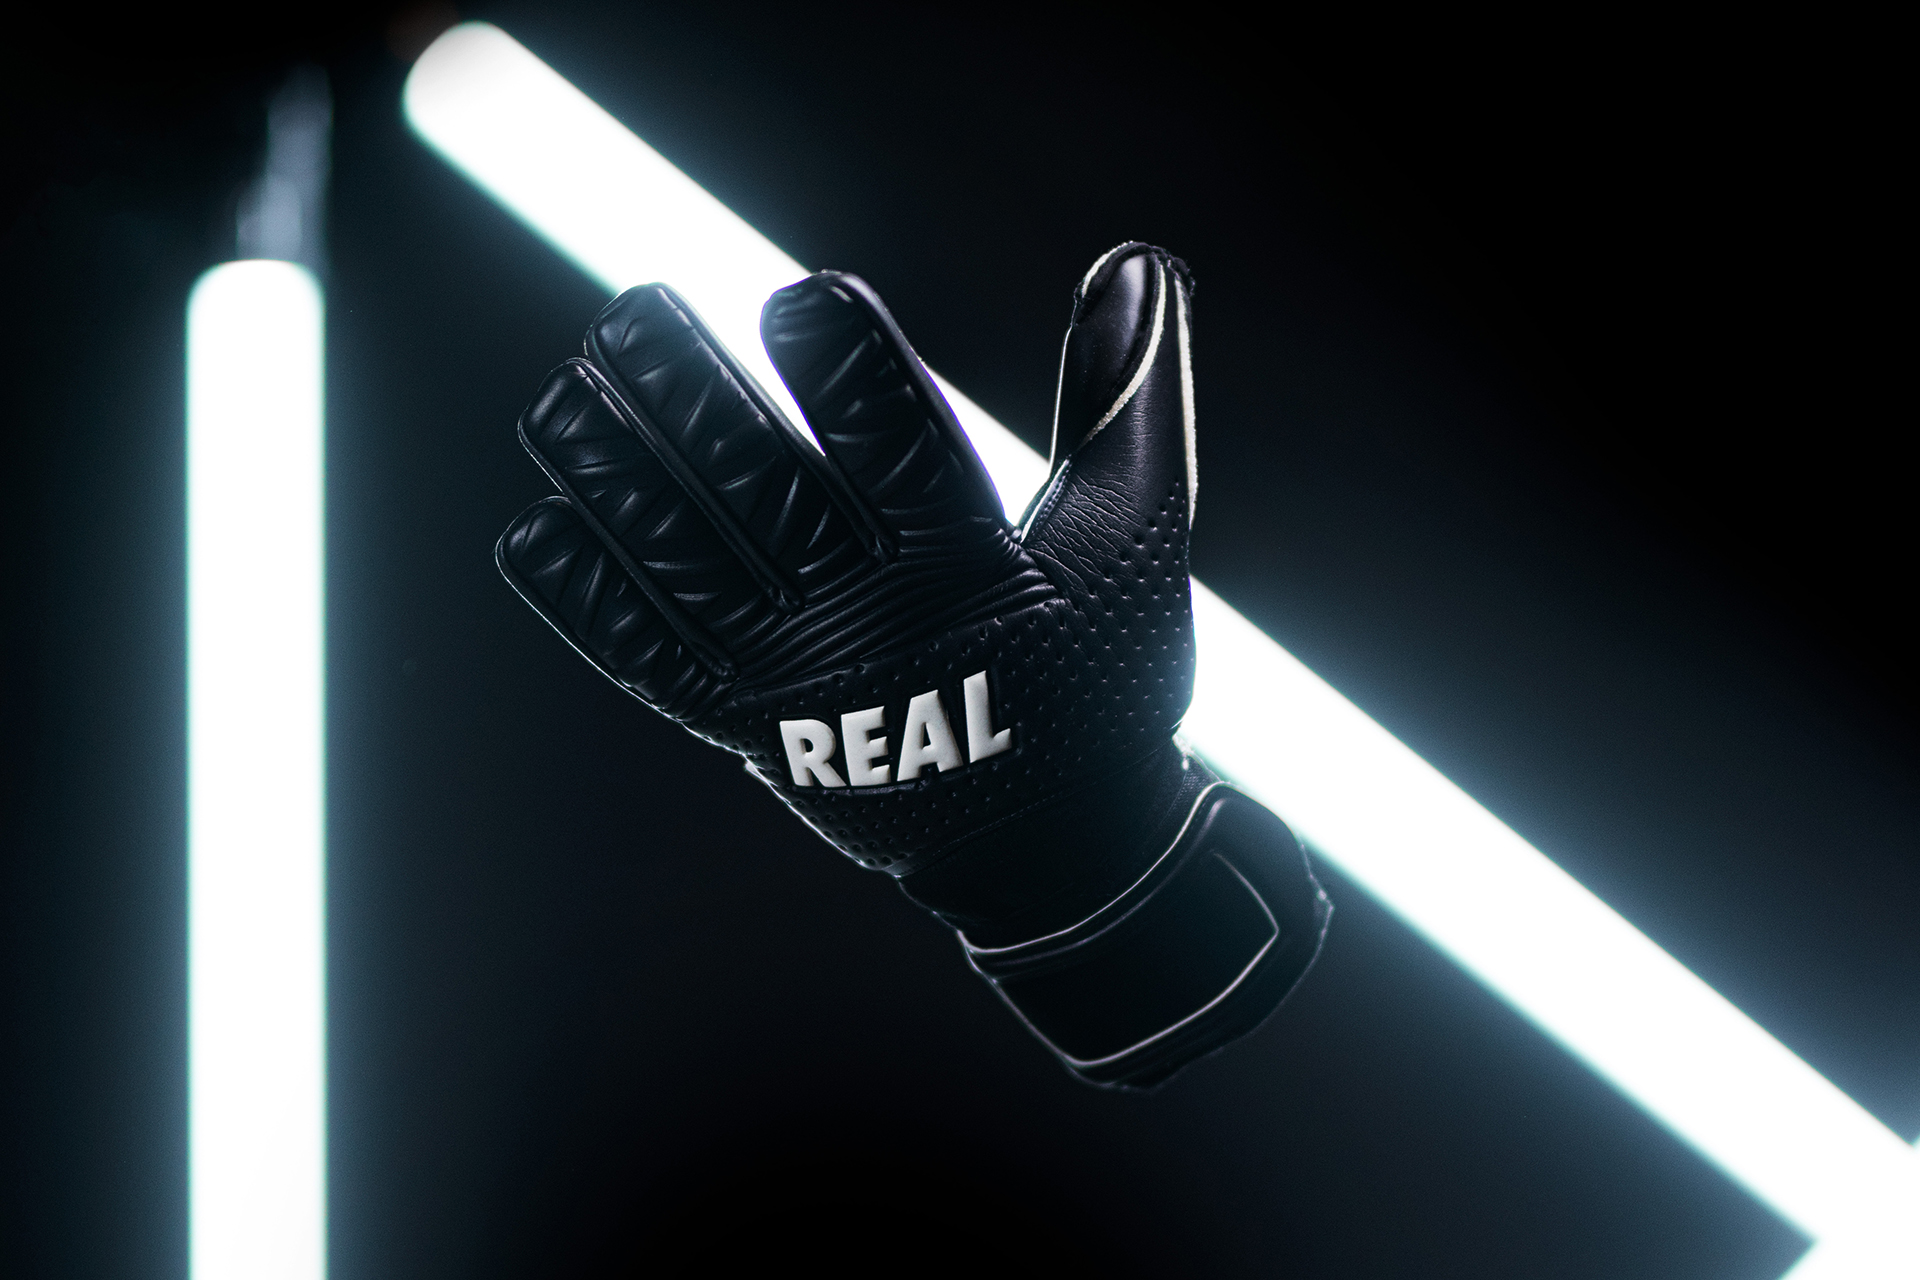 REAL Gloves